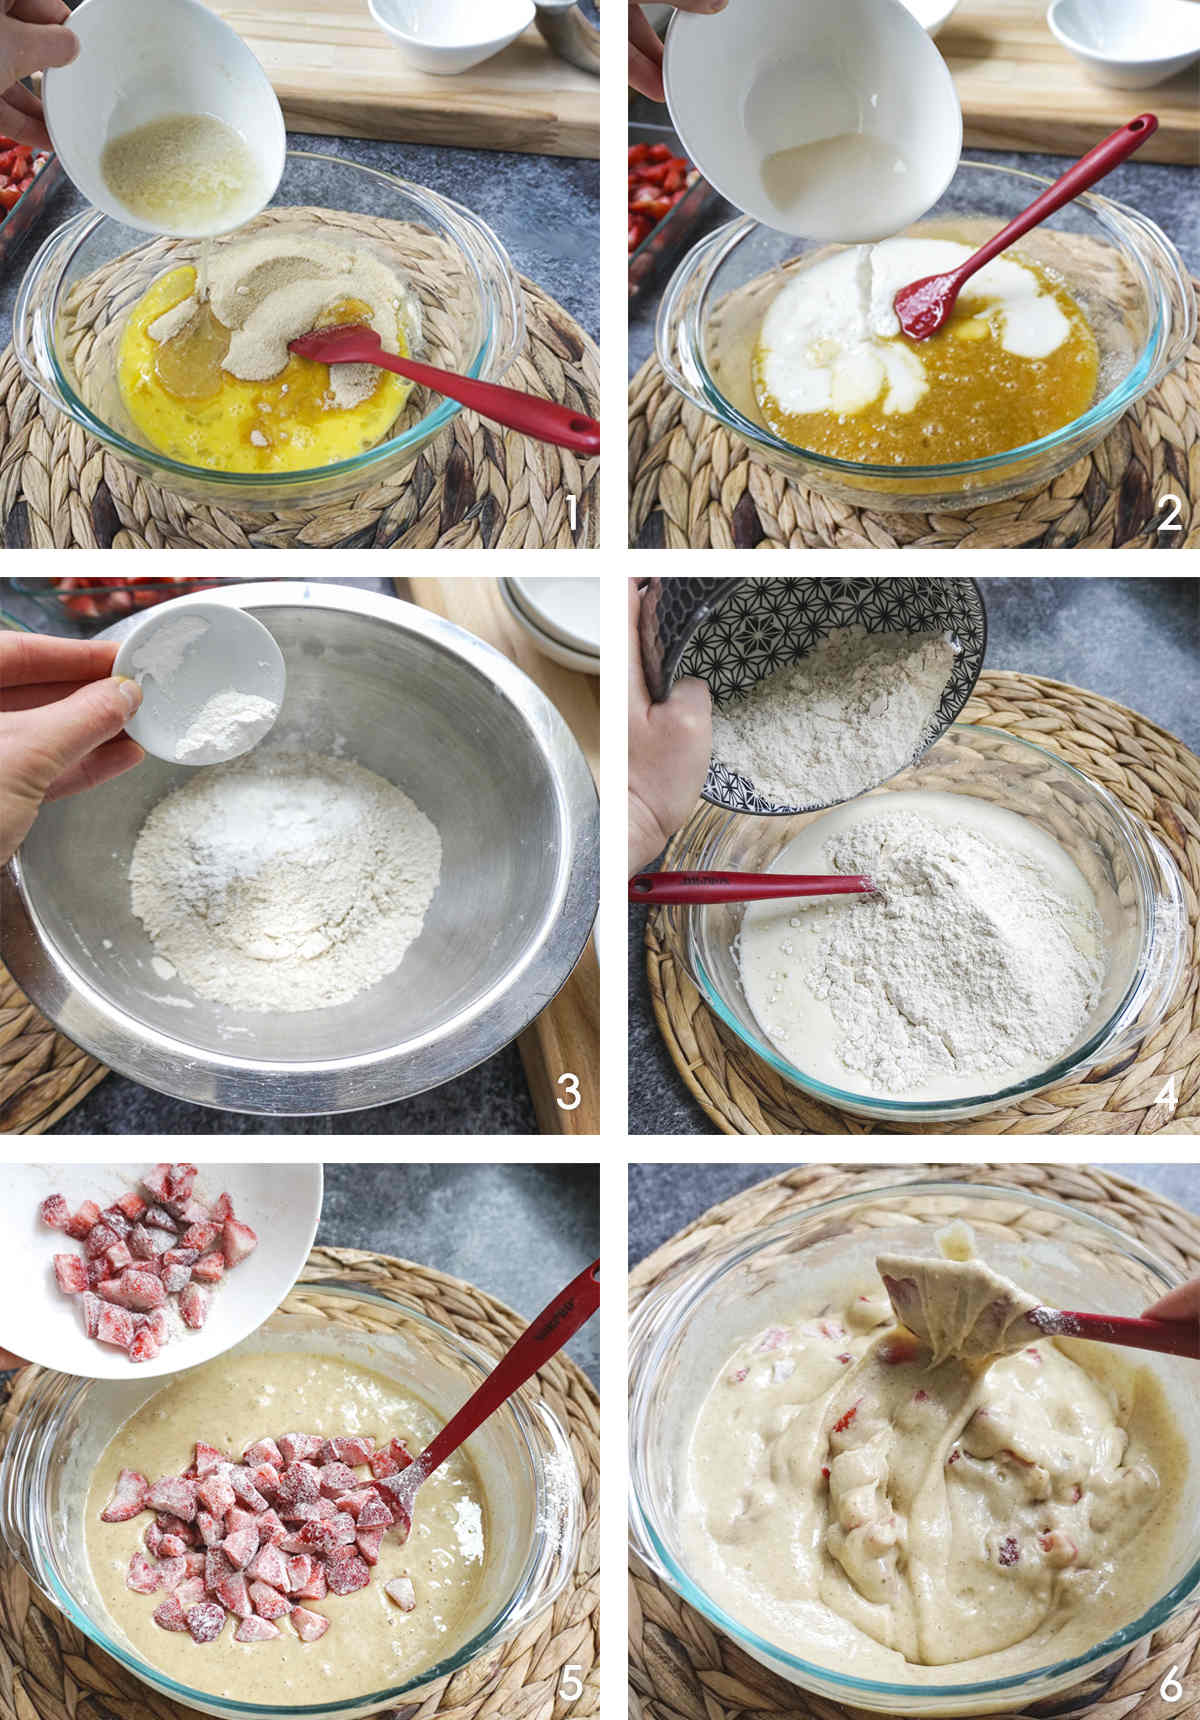 Process shots showing step by step how to make gluten free strawberry muffins.